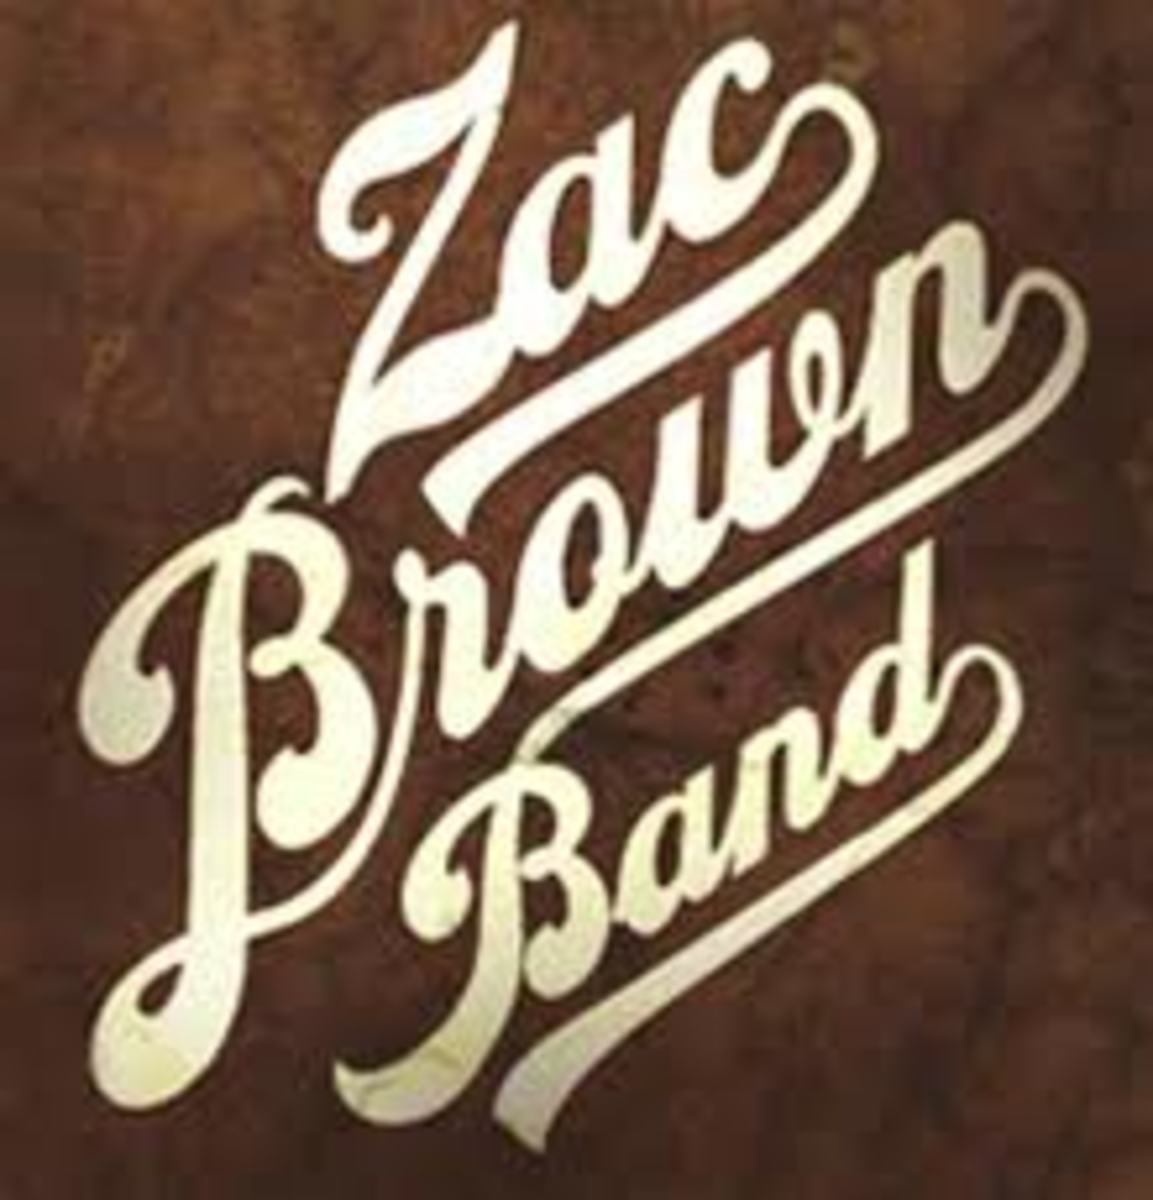 zac-brown-band-top-10-country-music-videos